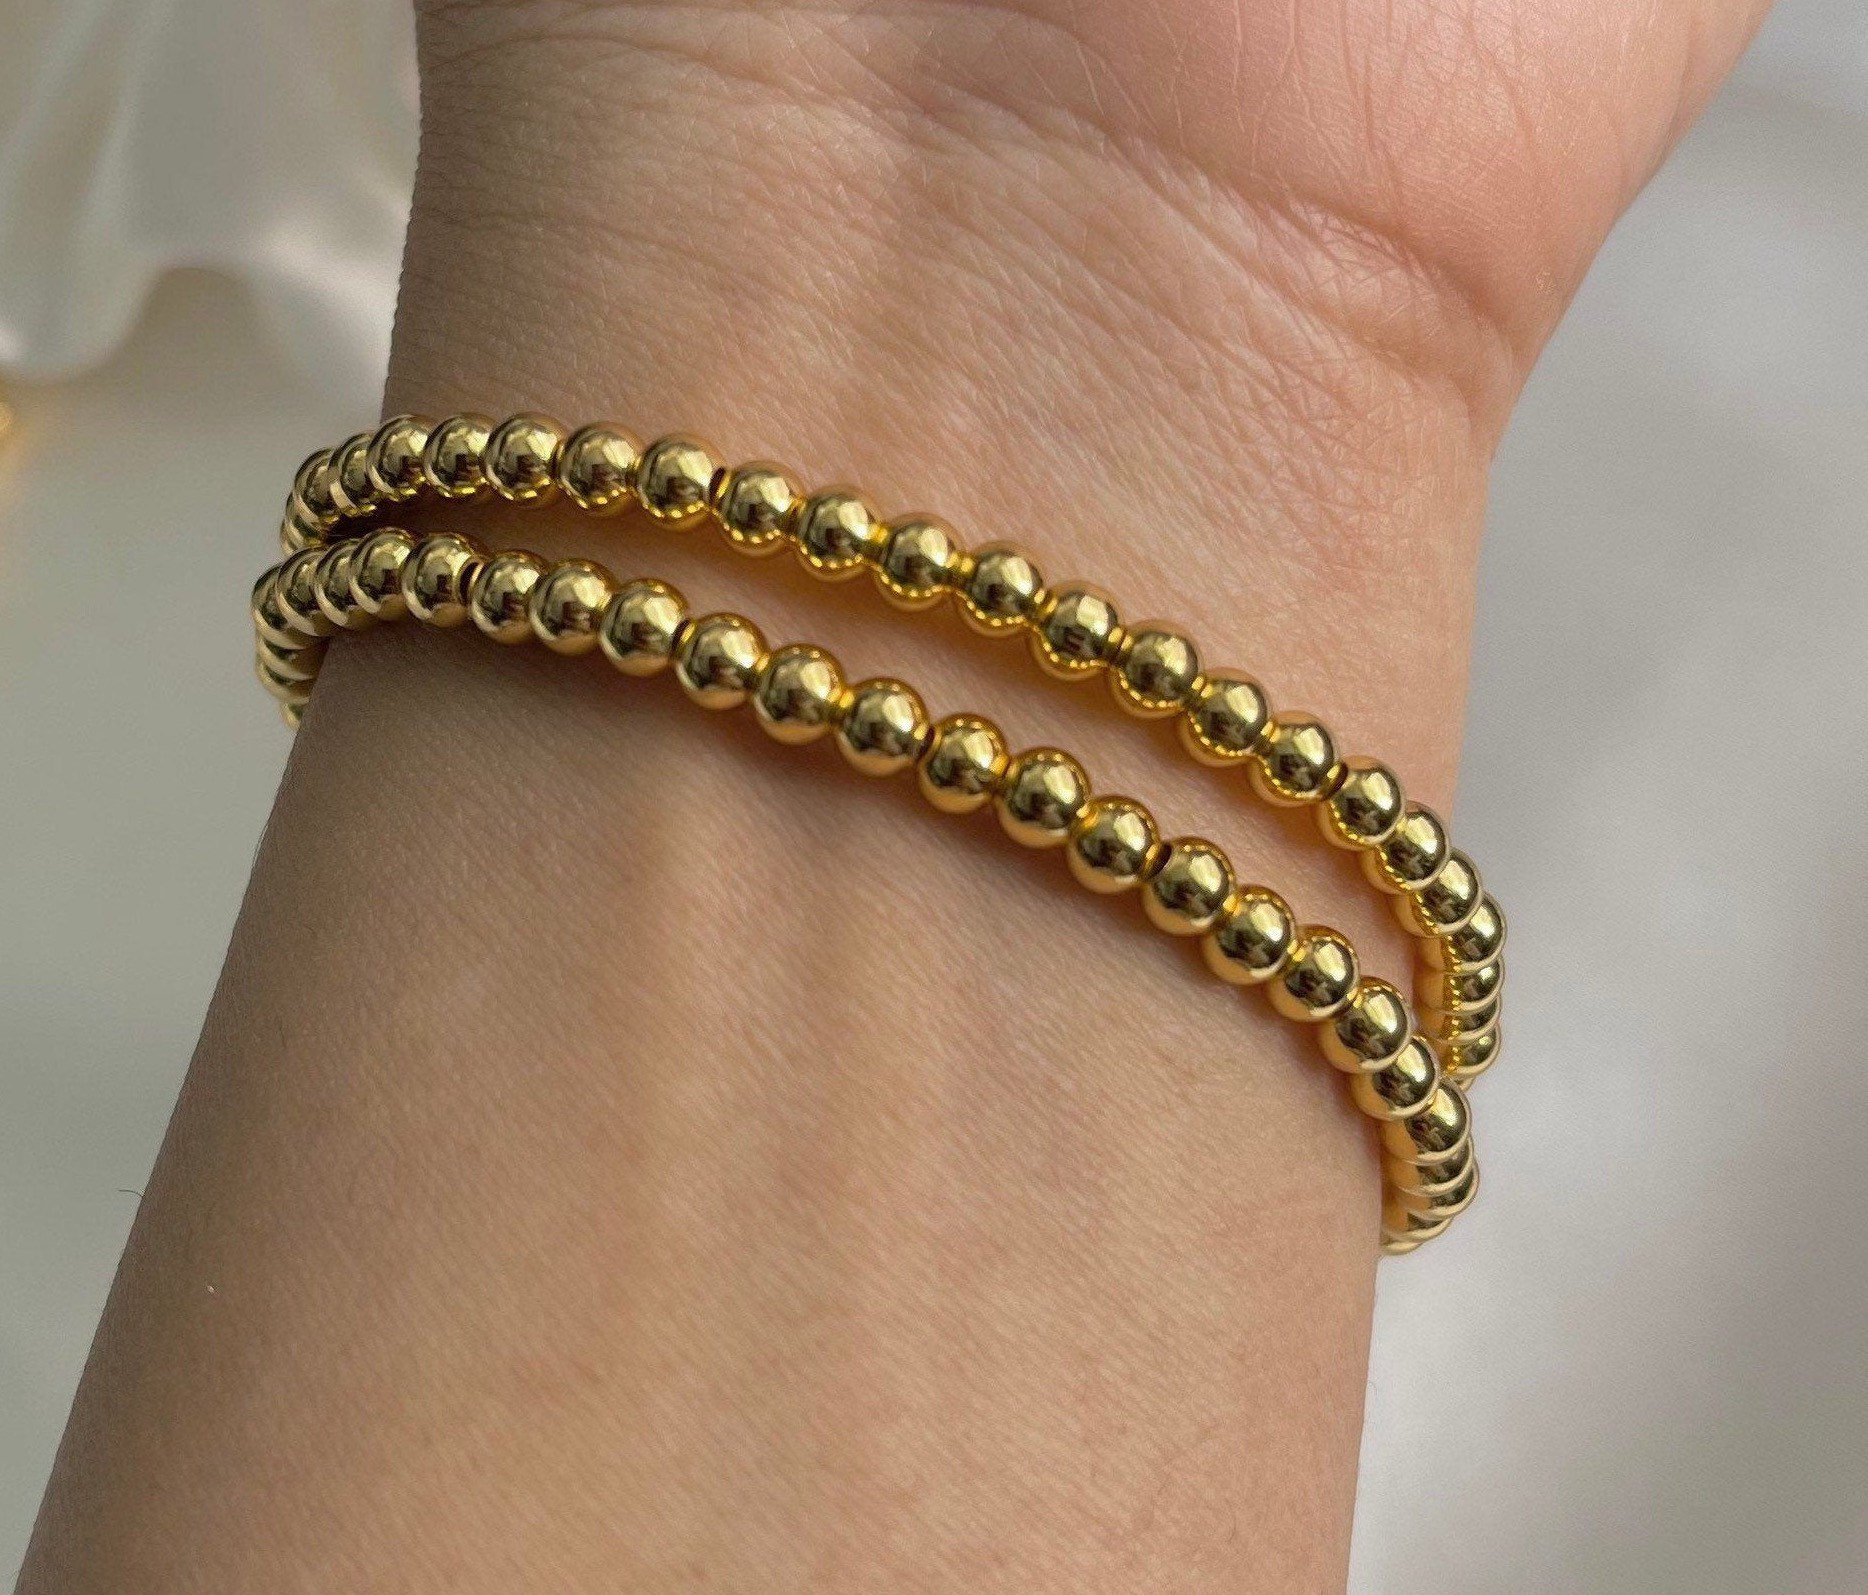 Set of Three 7mm Seamless Gold Filled Beaded Bracelet Small